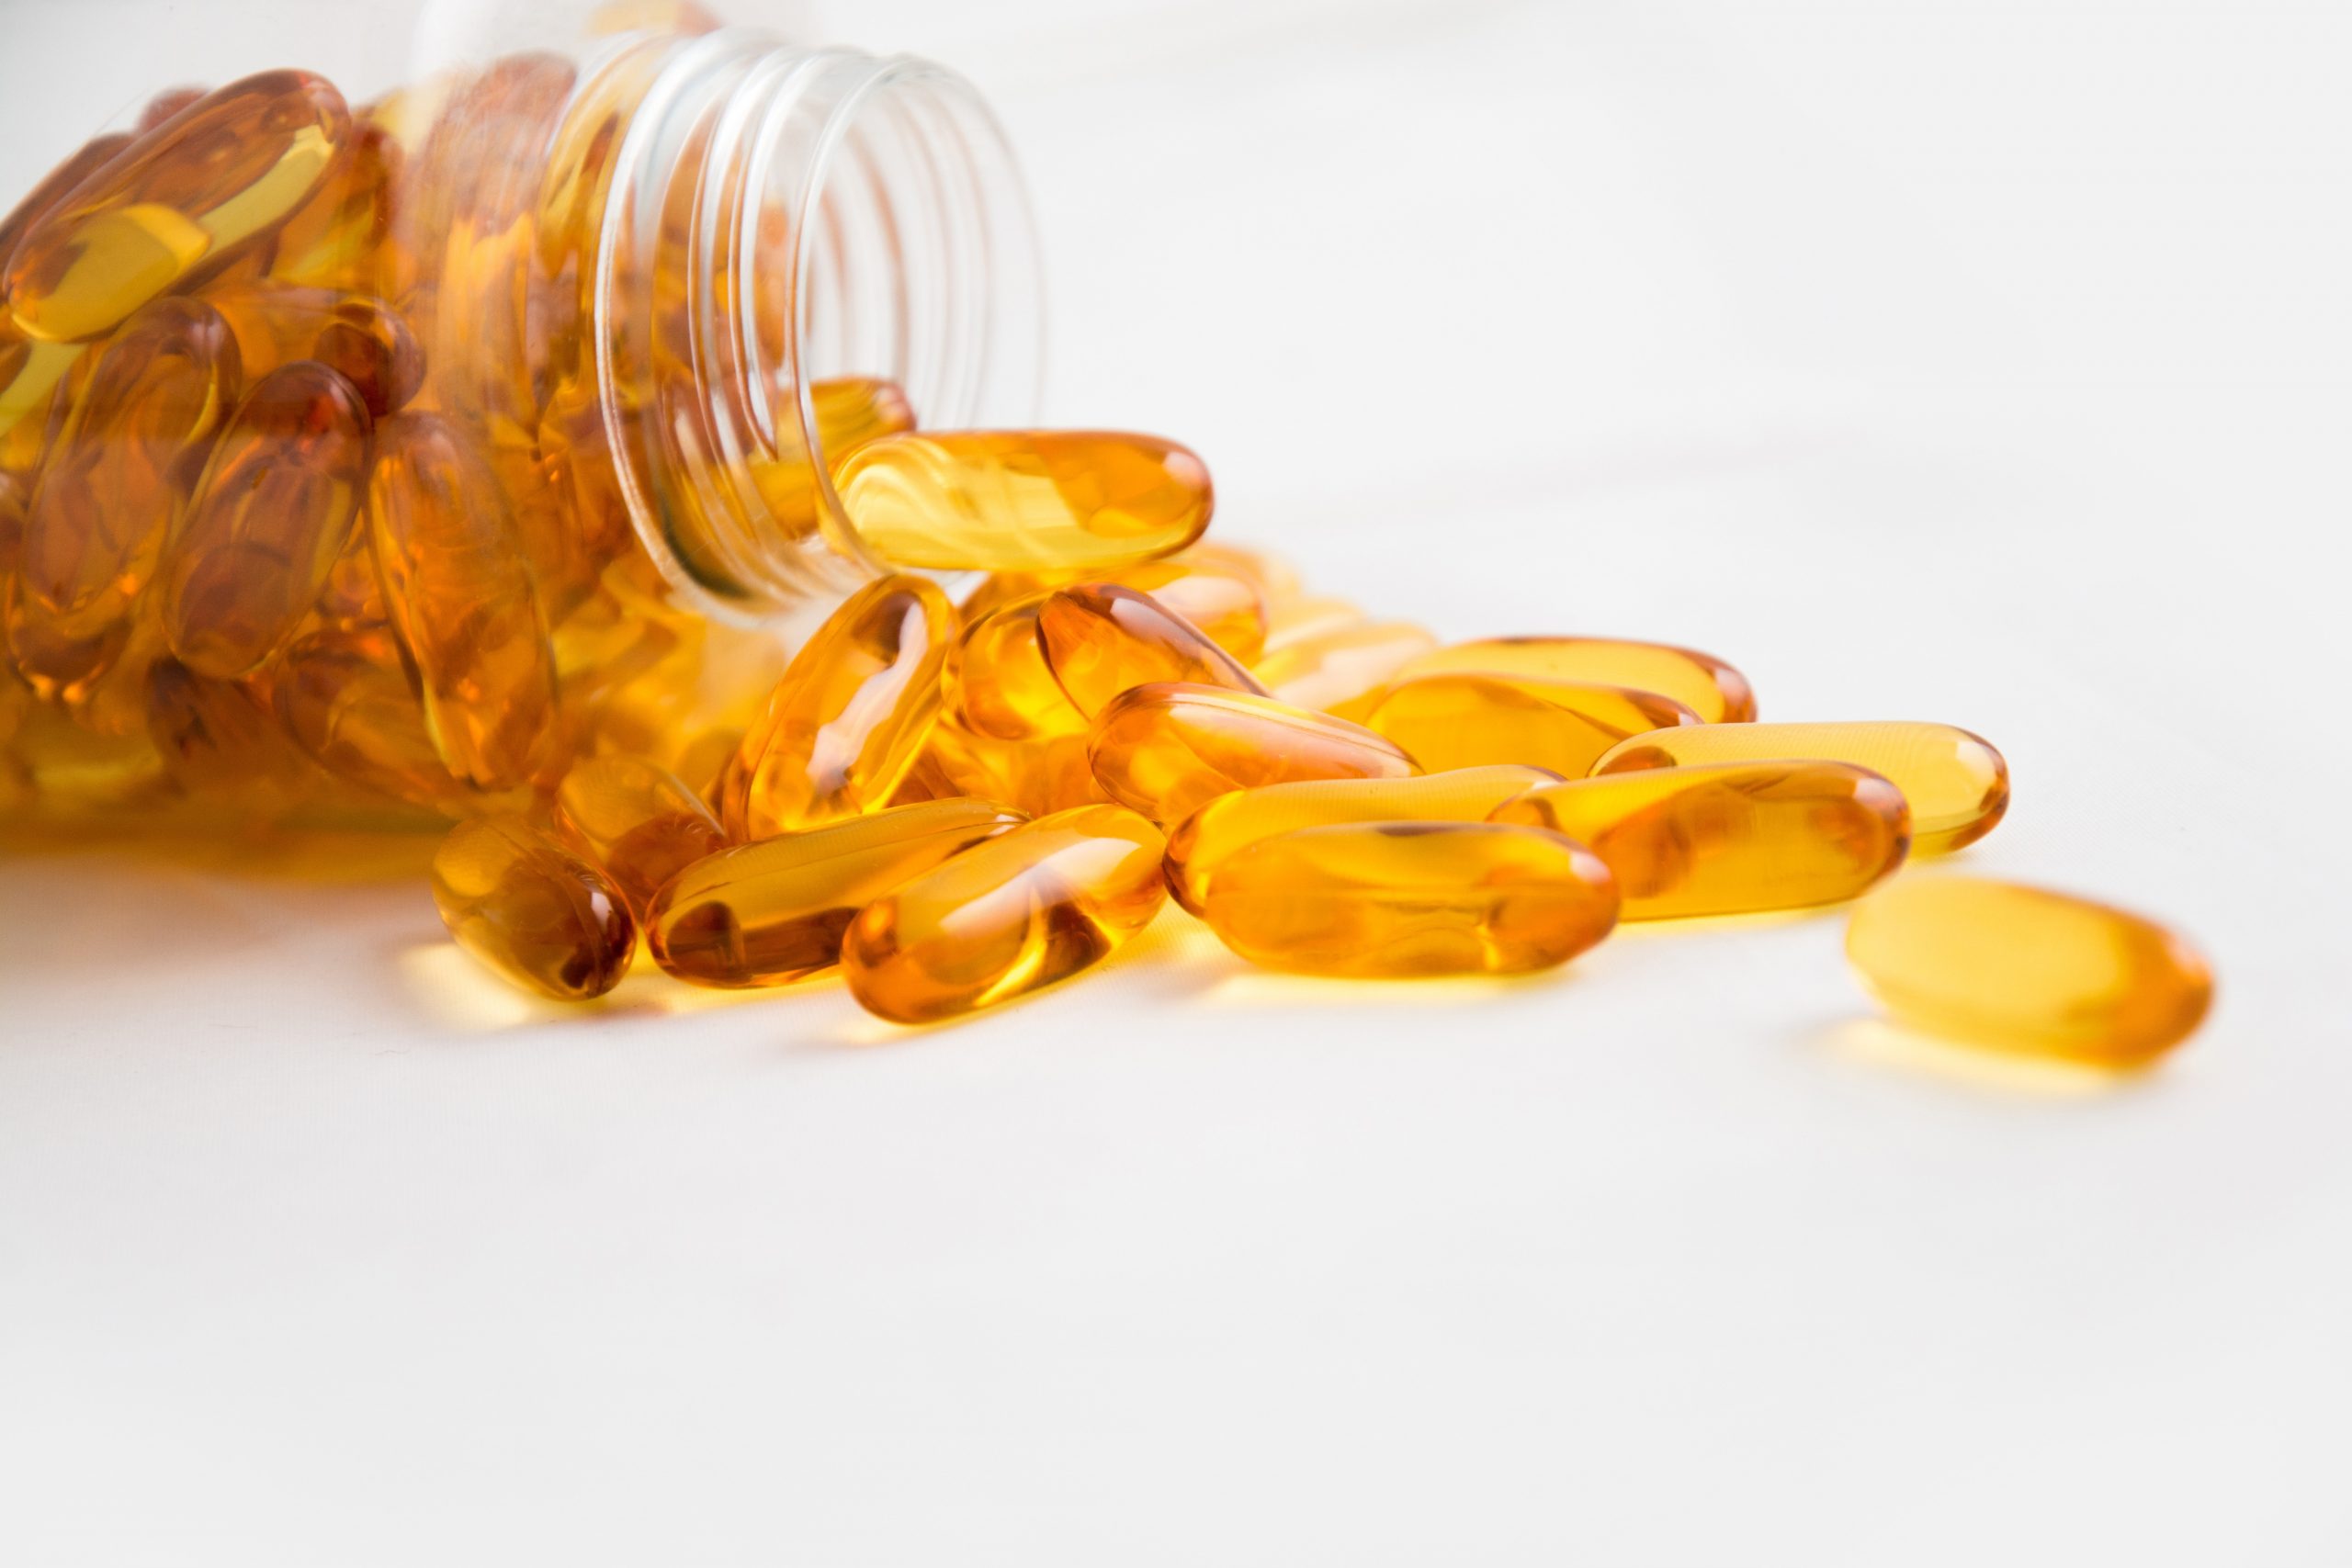 12 Of The Best Fish Oil Supplements in Malaysia To Get